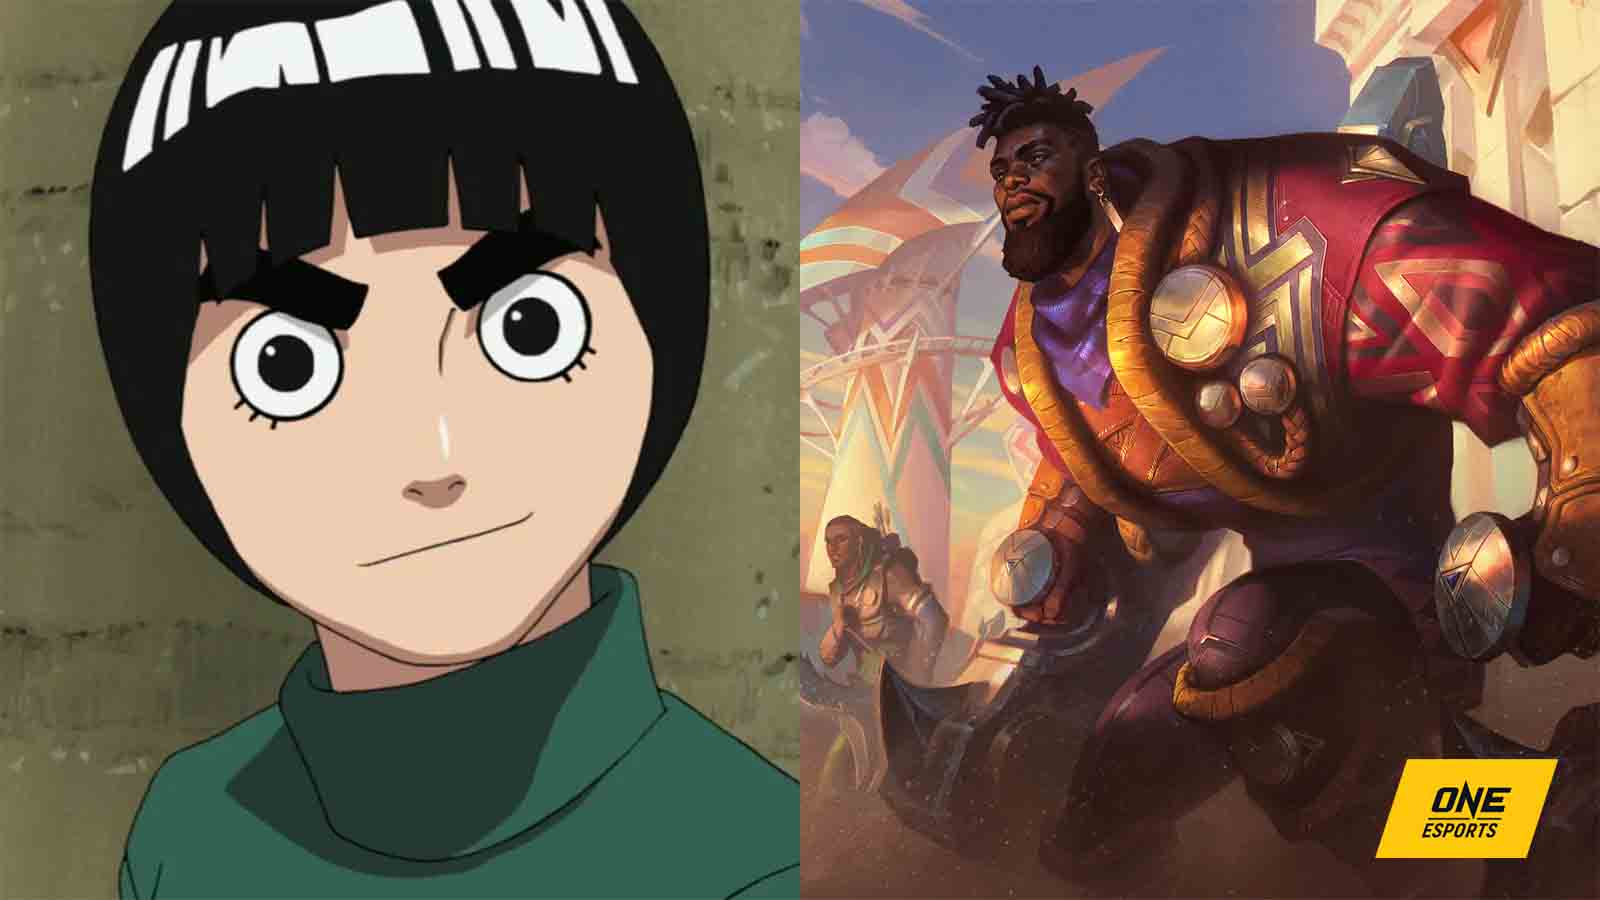 K'Sante's ultimate was inspired by Rock Lee from Naruto | ONE Esports